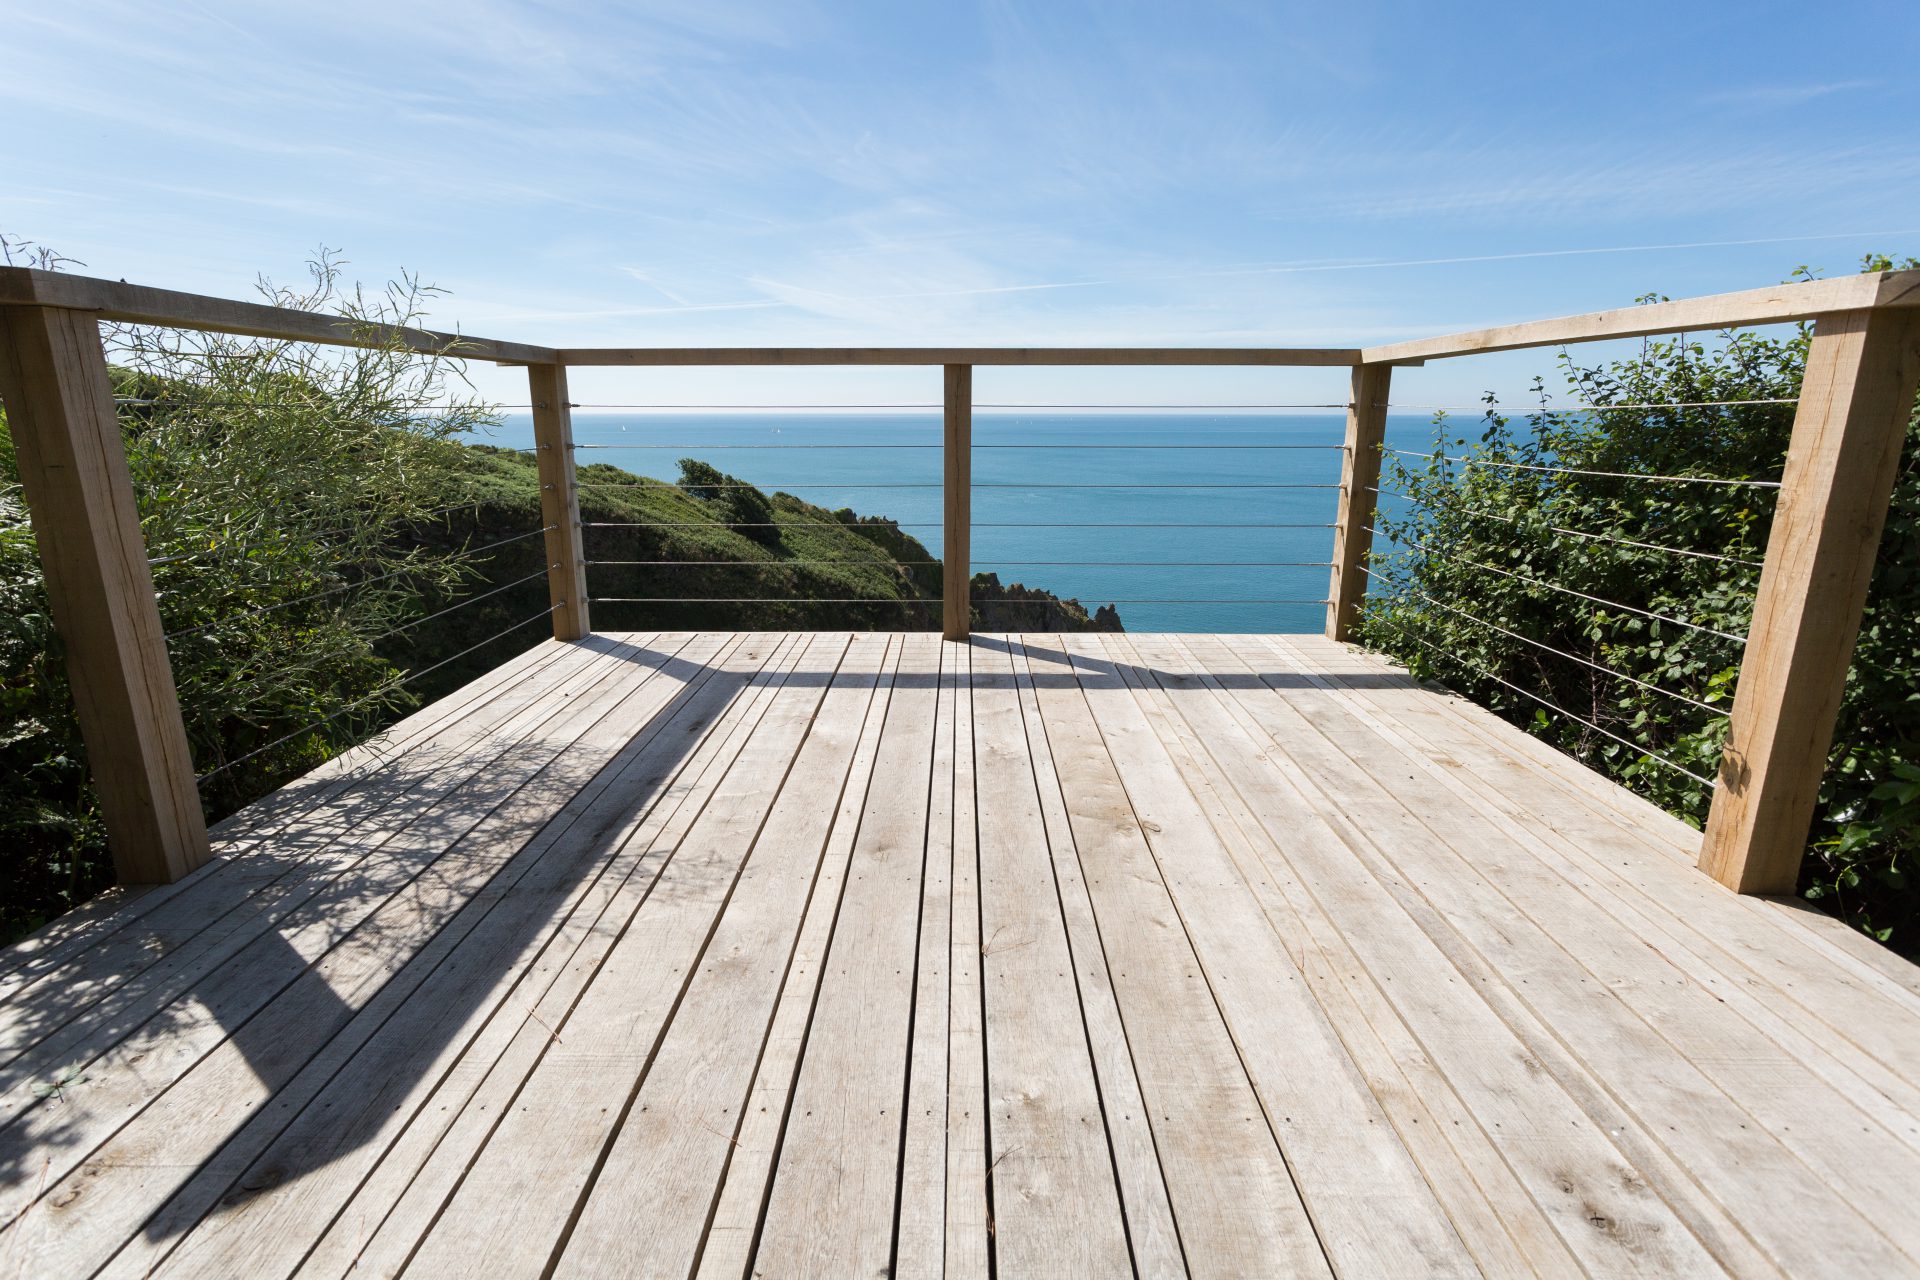 Cantilevered Cliff Deck